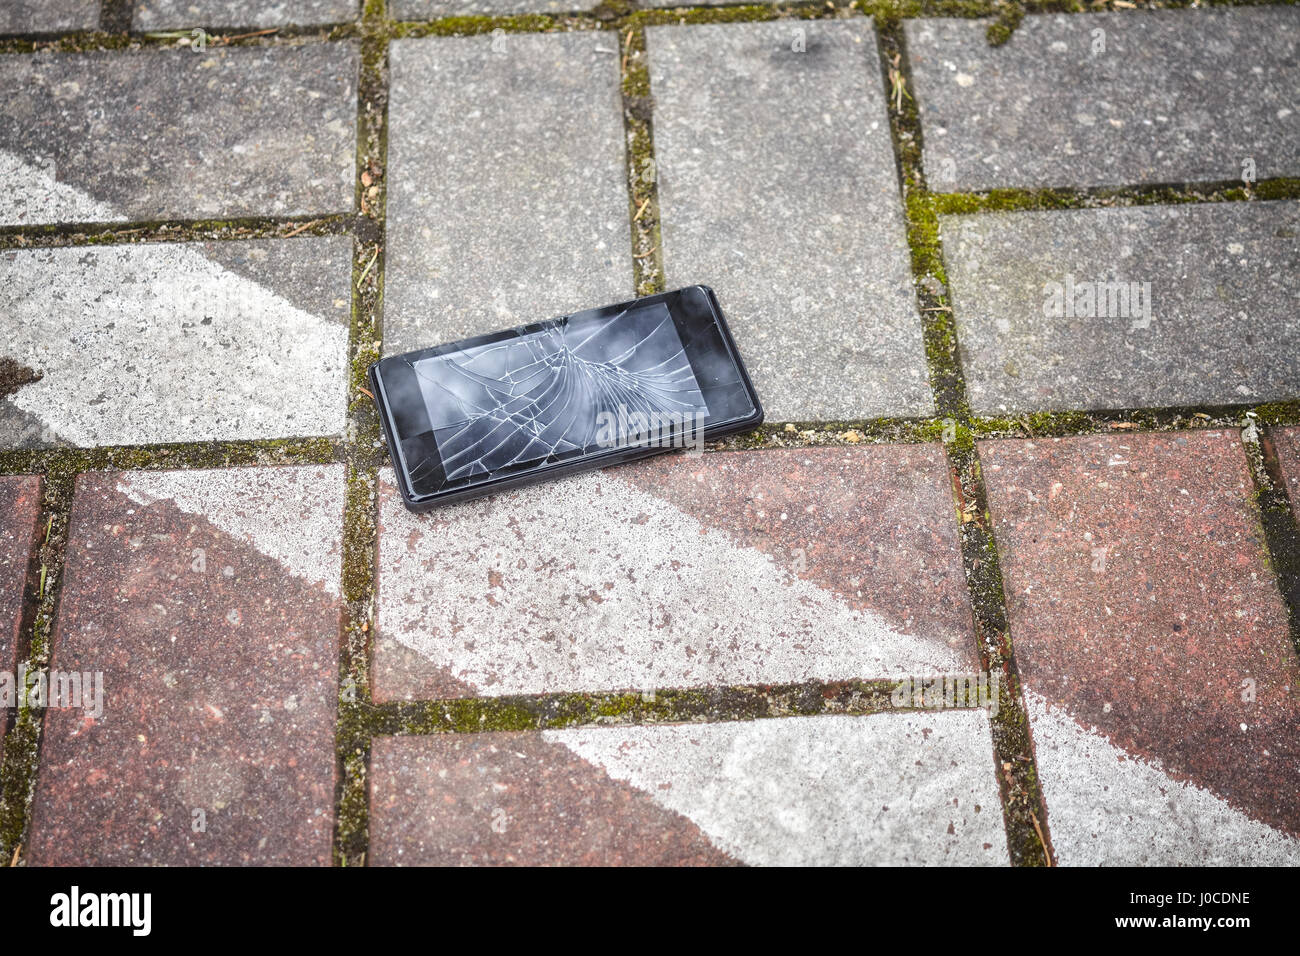 Close up picture of a mobile phone with broken screen on a parking pavement. Stock Photo